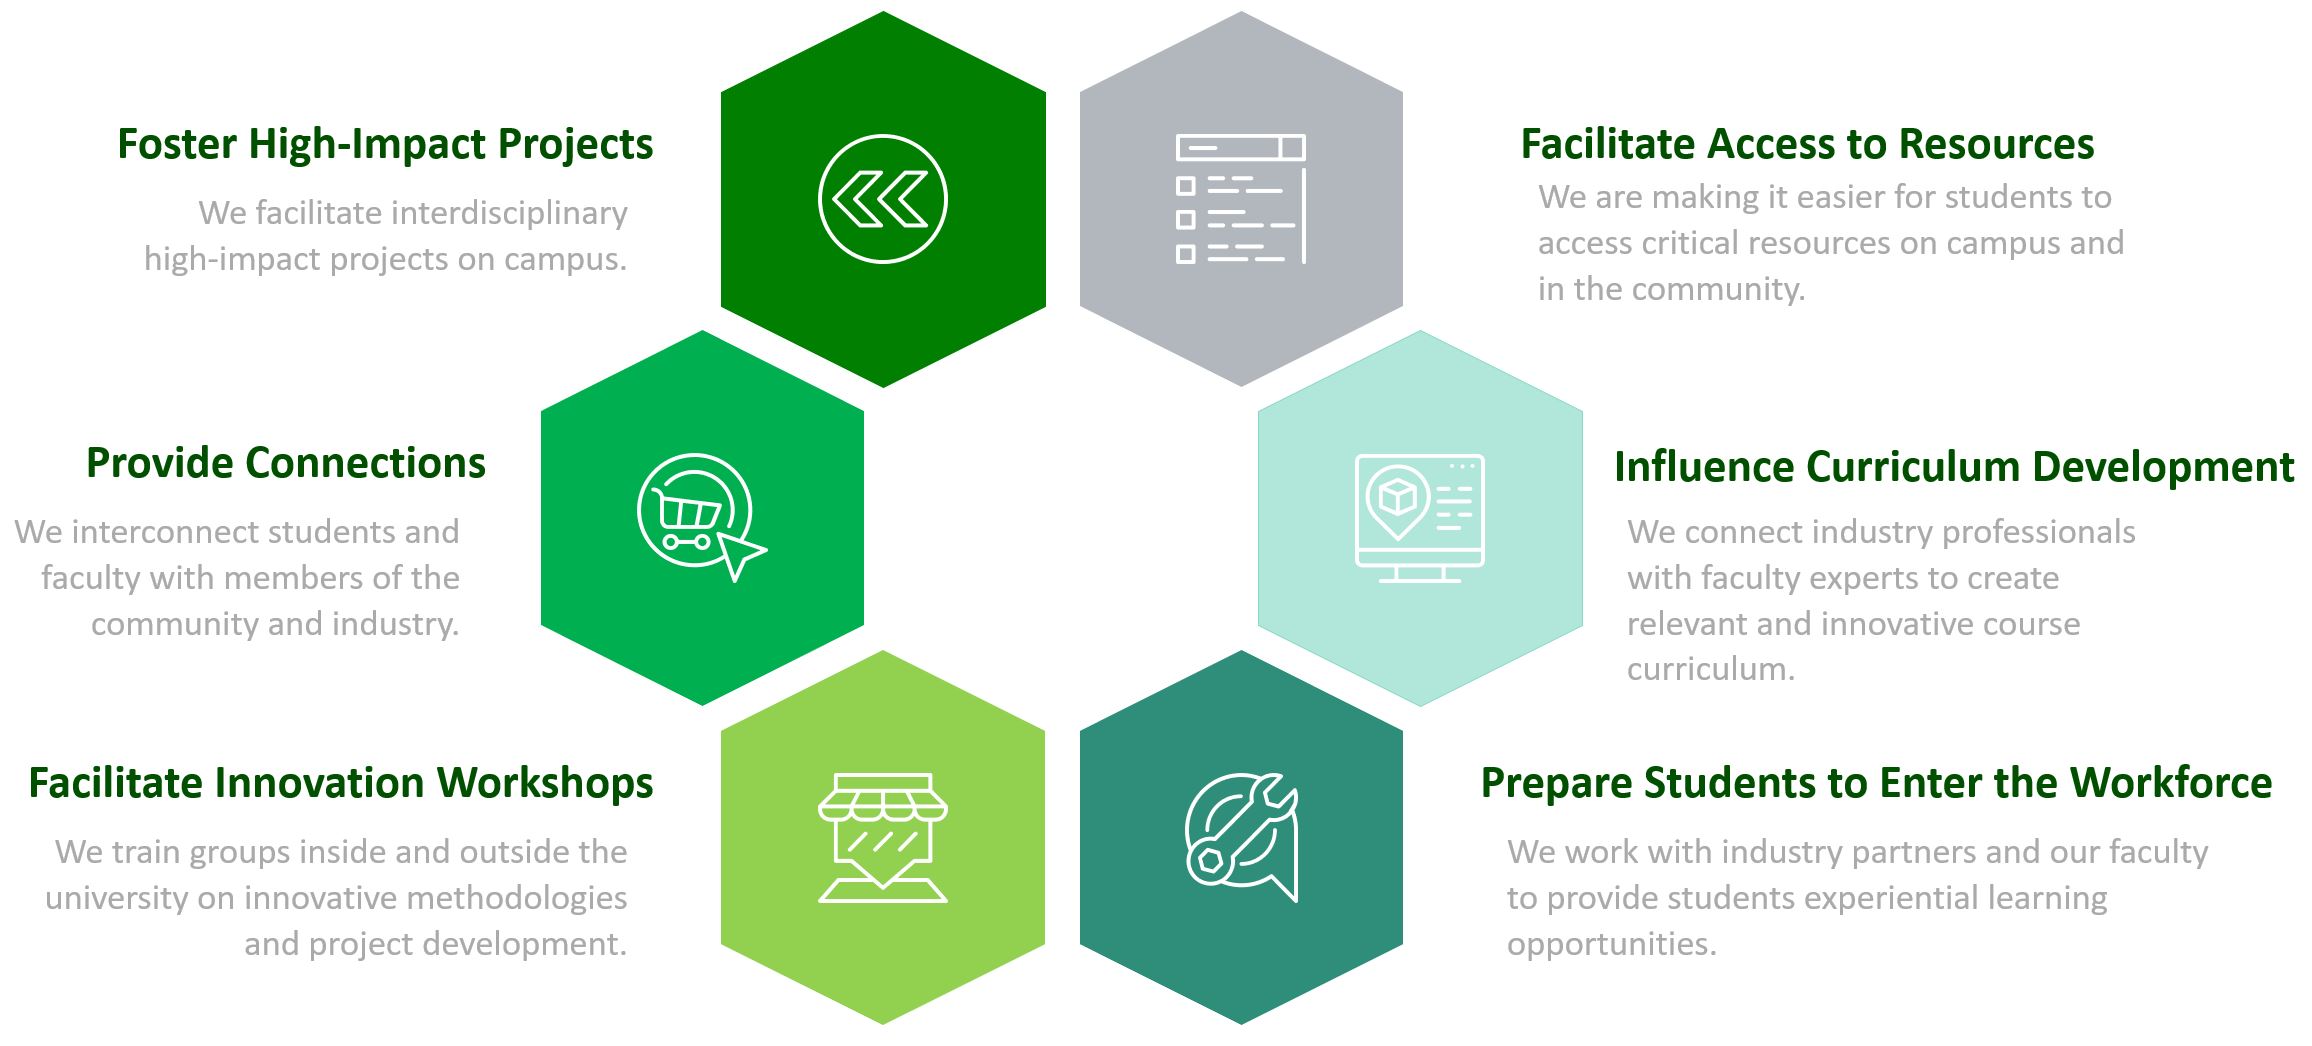 6 Hexagaons describing the main focuses of the Excellence and Innovation initiative. Foster High Impact Project. Provide Connections. Facilitate Innovation Workshops. Facilitate Access to Resources. Influence Curriculum Development. Prepare Students to Enter the Workforce.